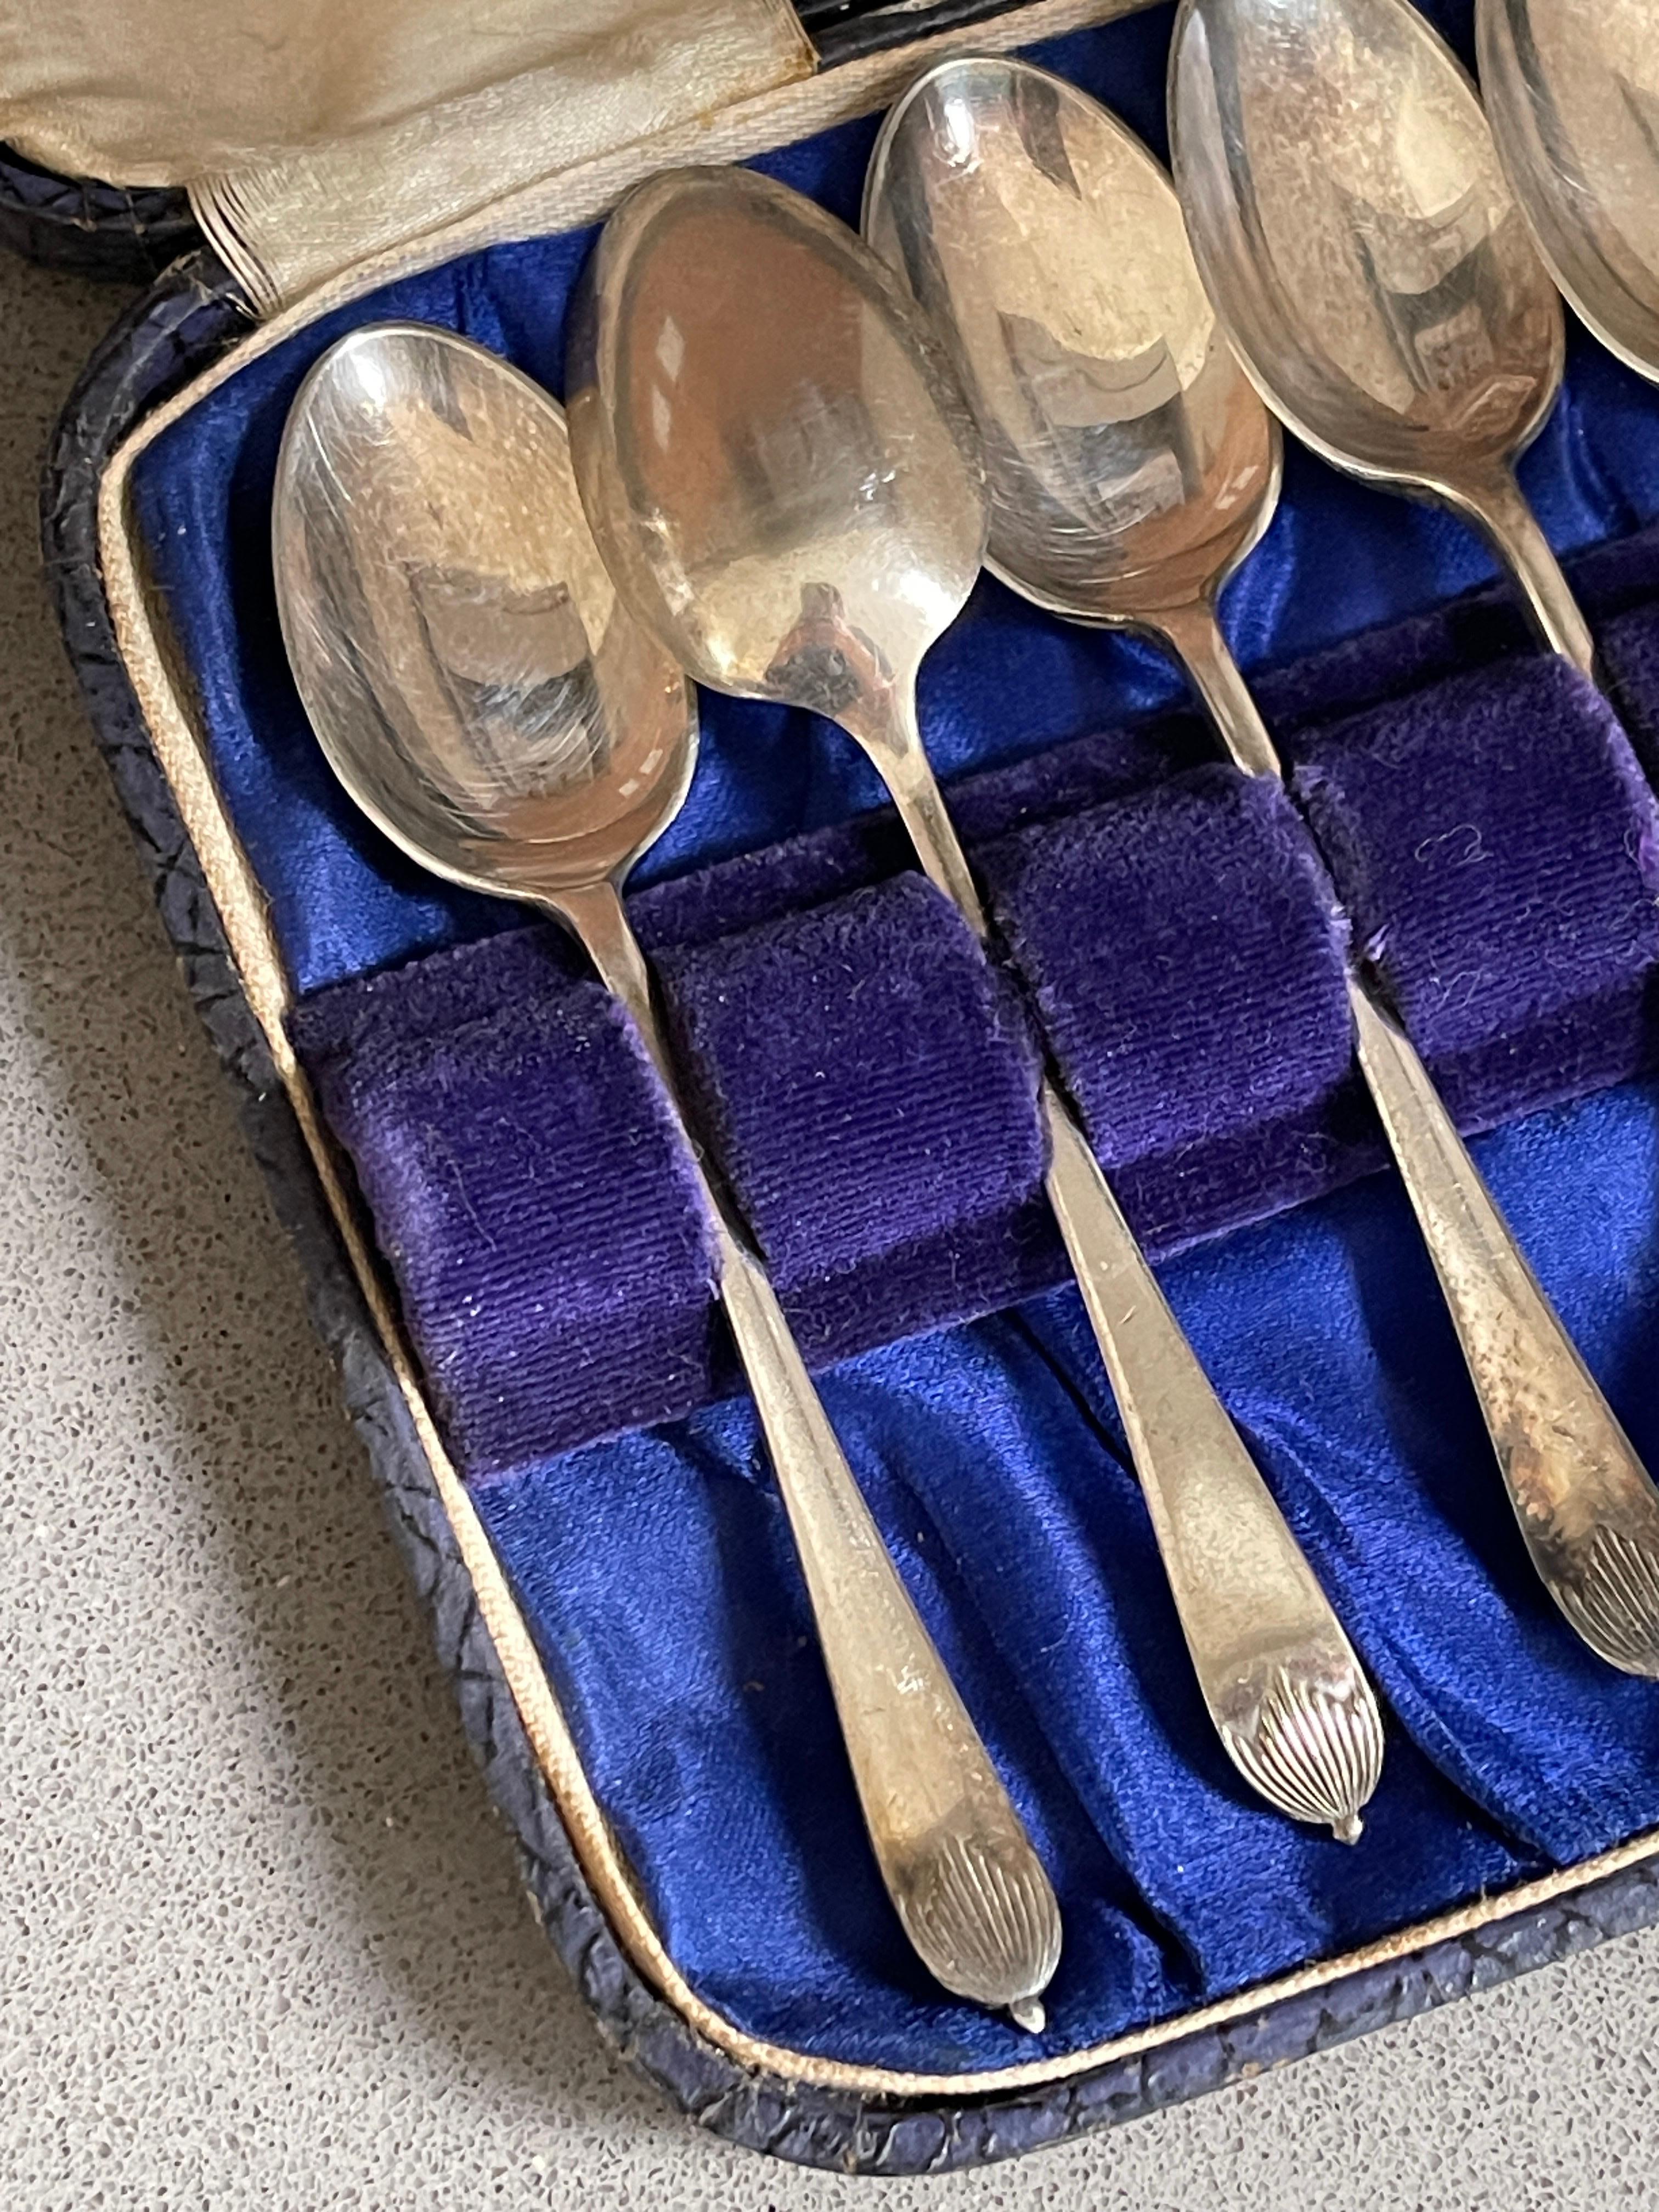 English Exclusive Tea COFFEE SPOONS, 6 pcs. Sterling Silver & Box, Antique Silver Spoons For Sale